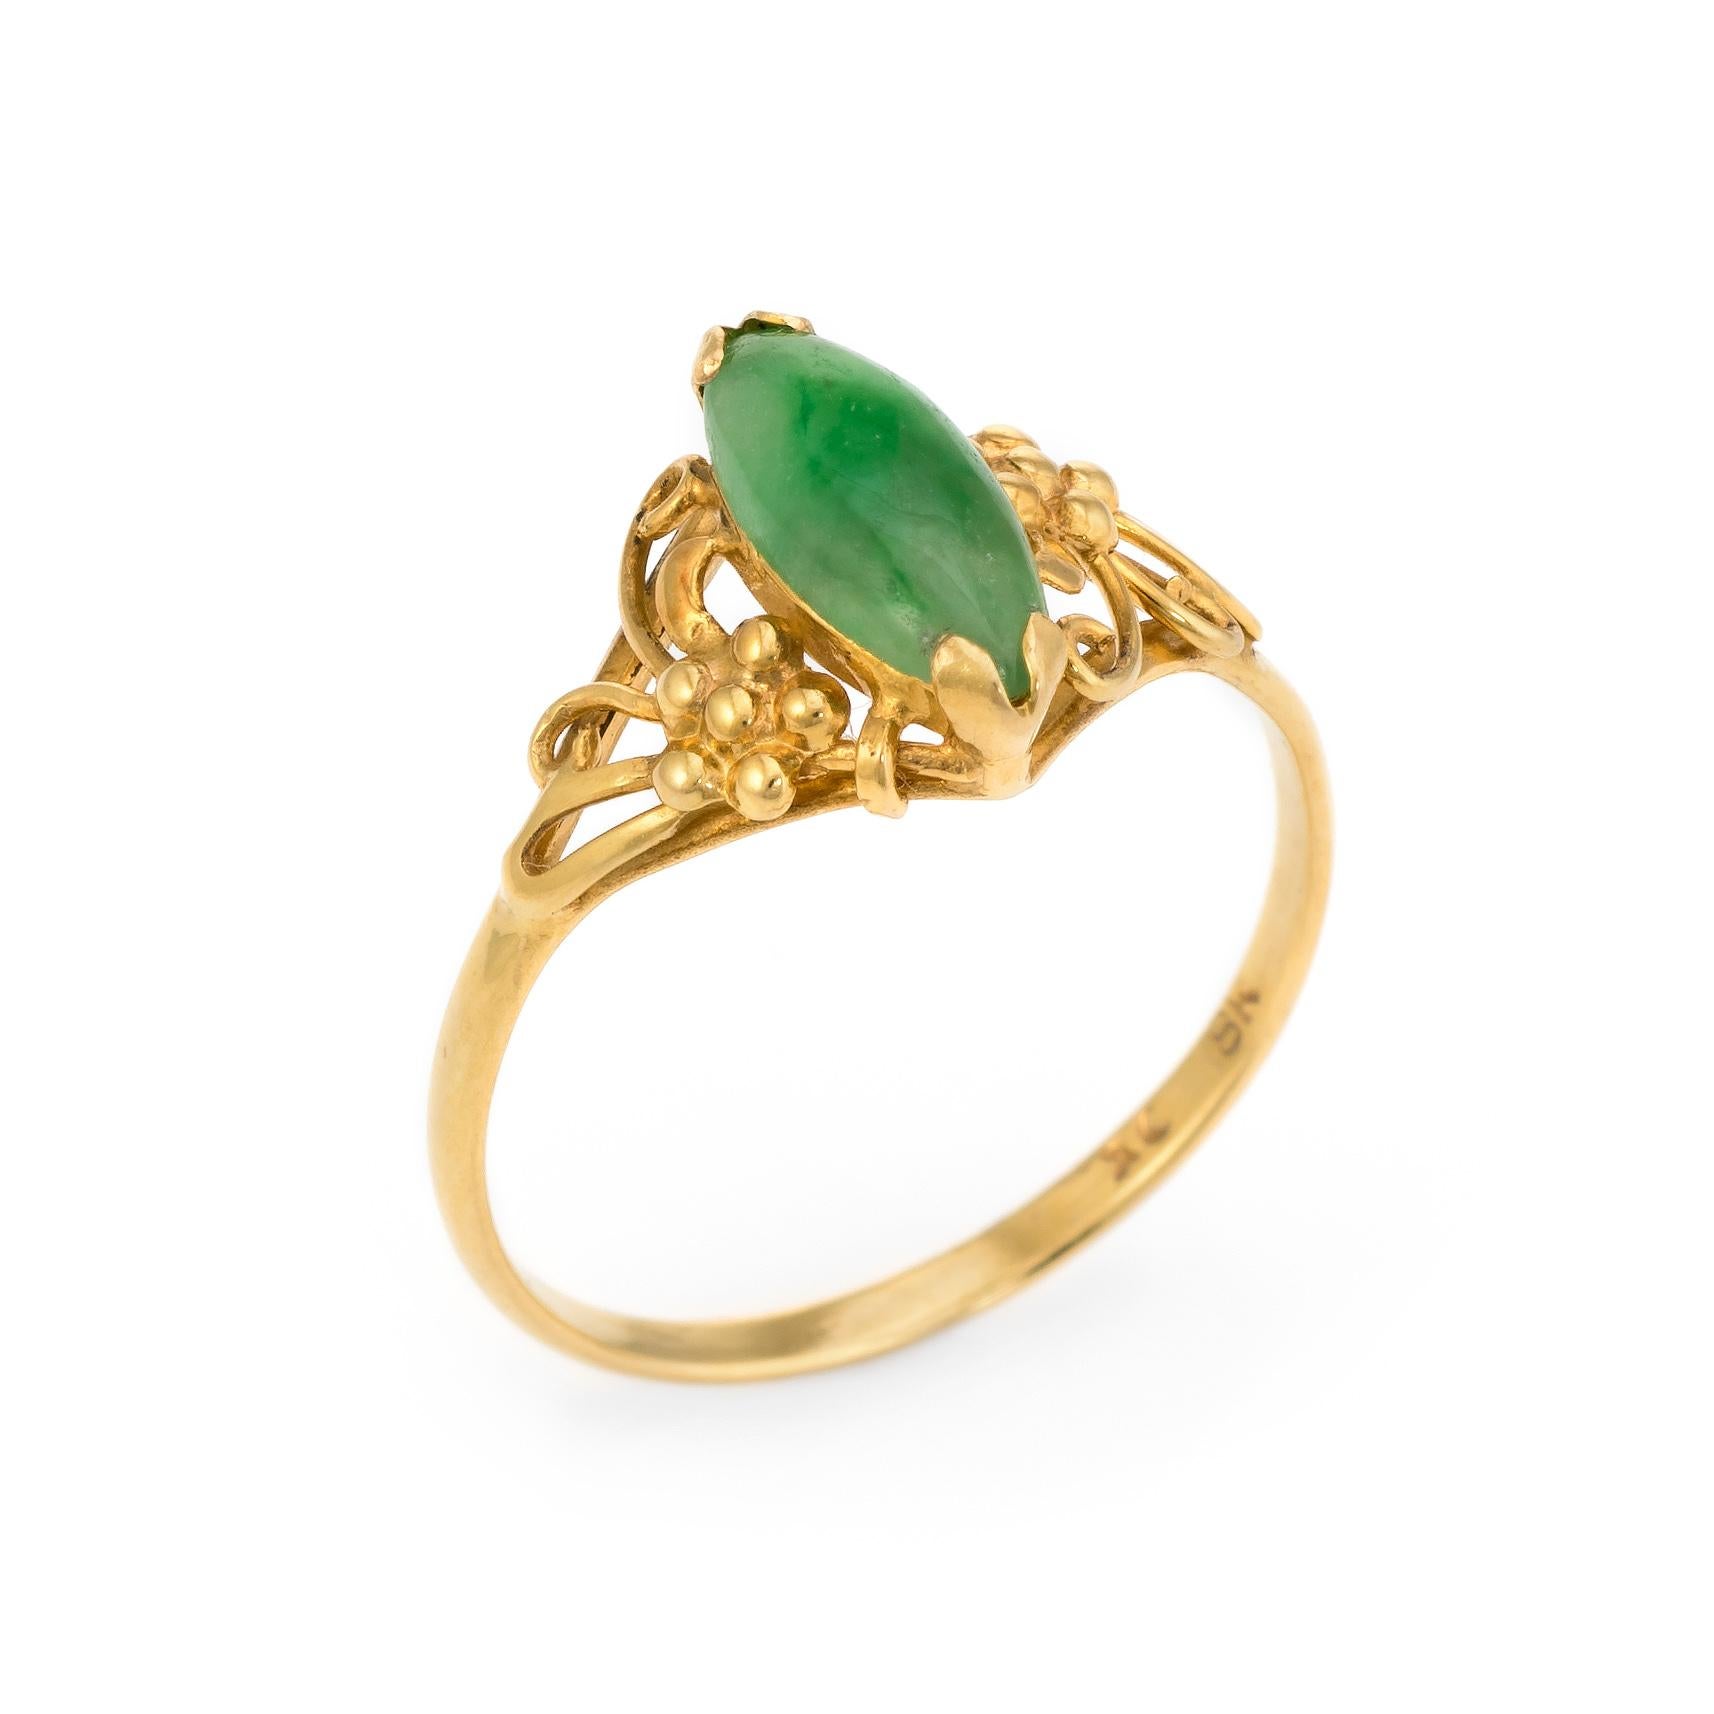 Finely detailed jadeite jade small cocktail ring (circa 1950s to 1960s), crafted in 18 karat yellow gold. 

Jadeite is cut en cabochon, measuring 10mm x 4mm (estimated at 0.75 carats). The jade is in excellent condition and free of cracks or chips. 